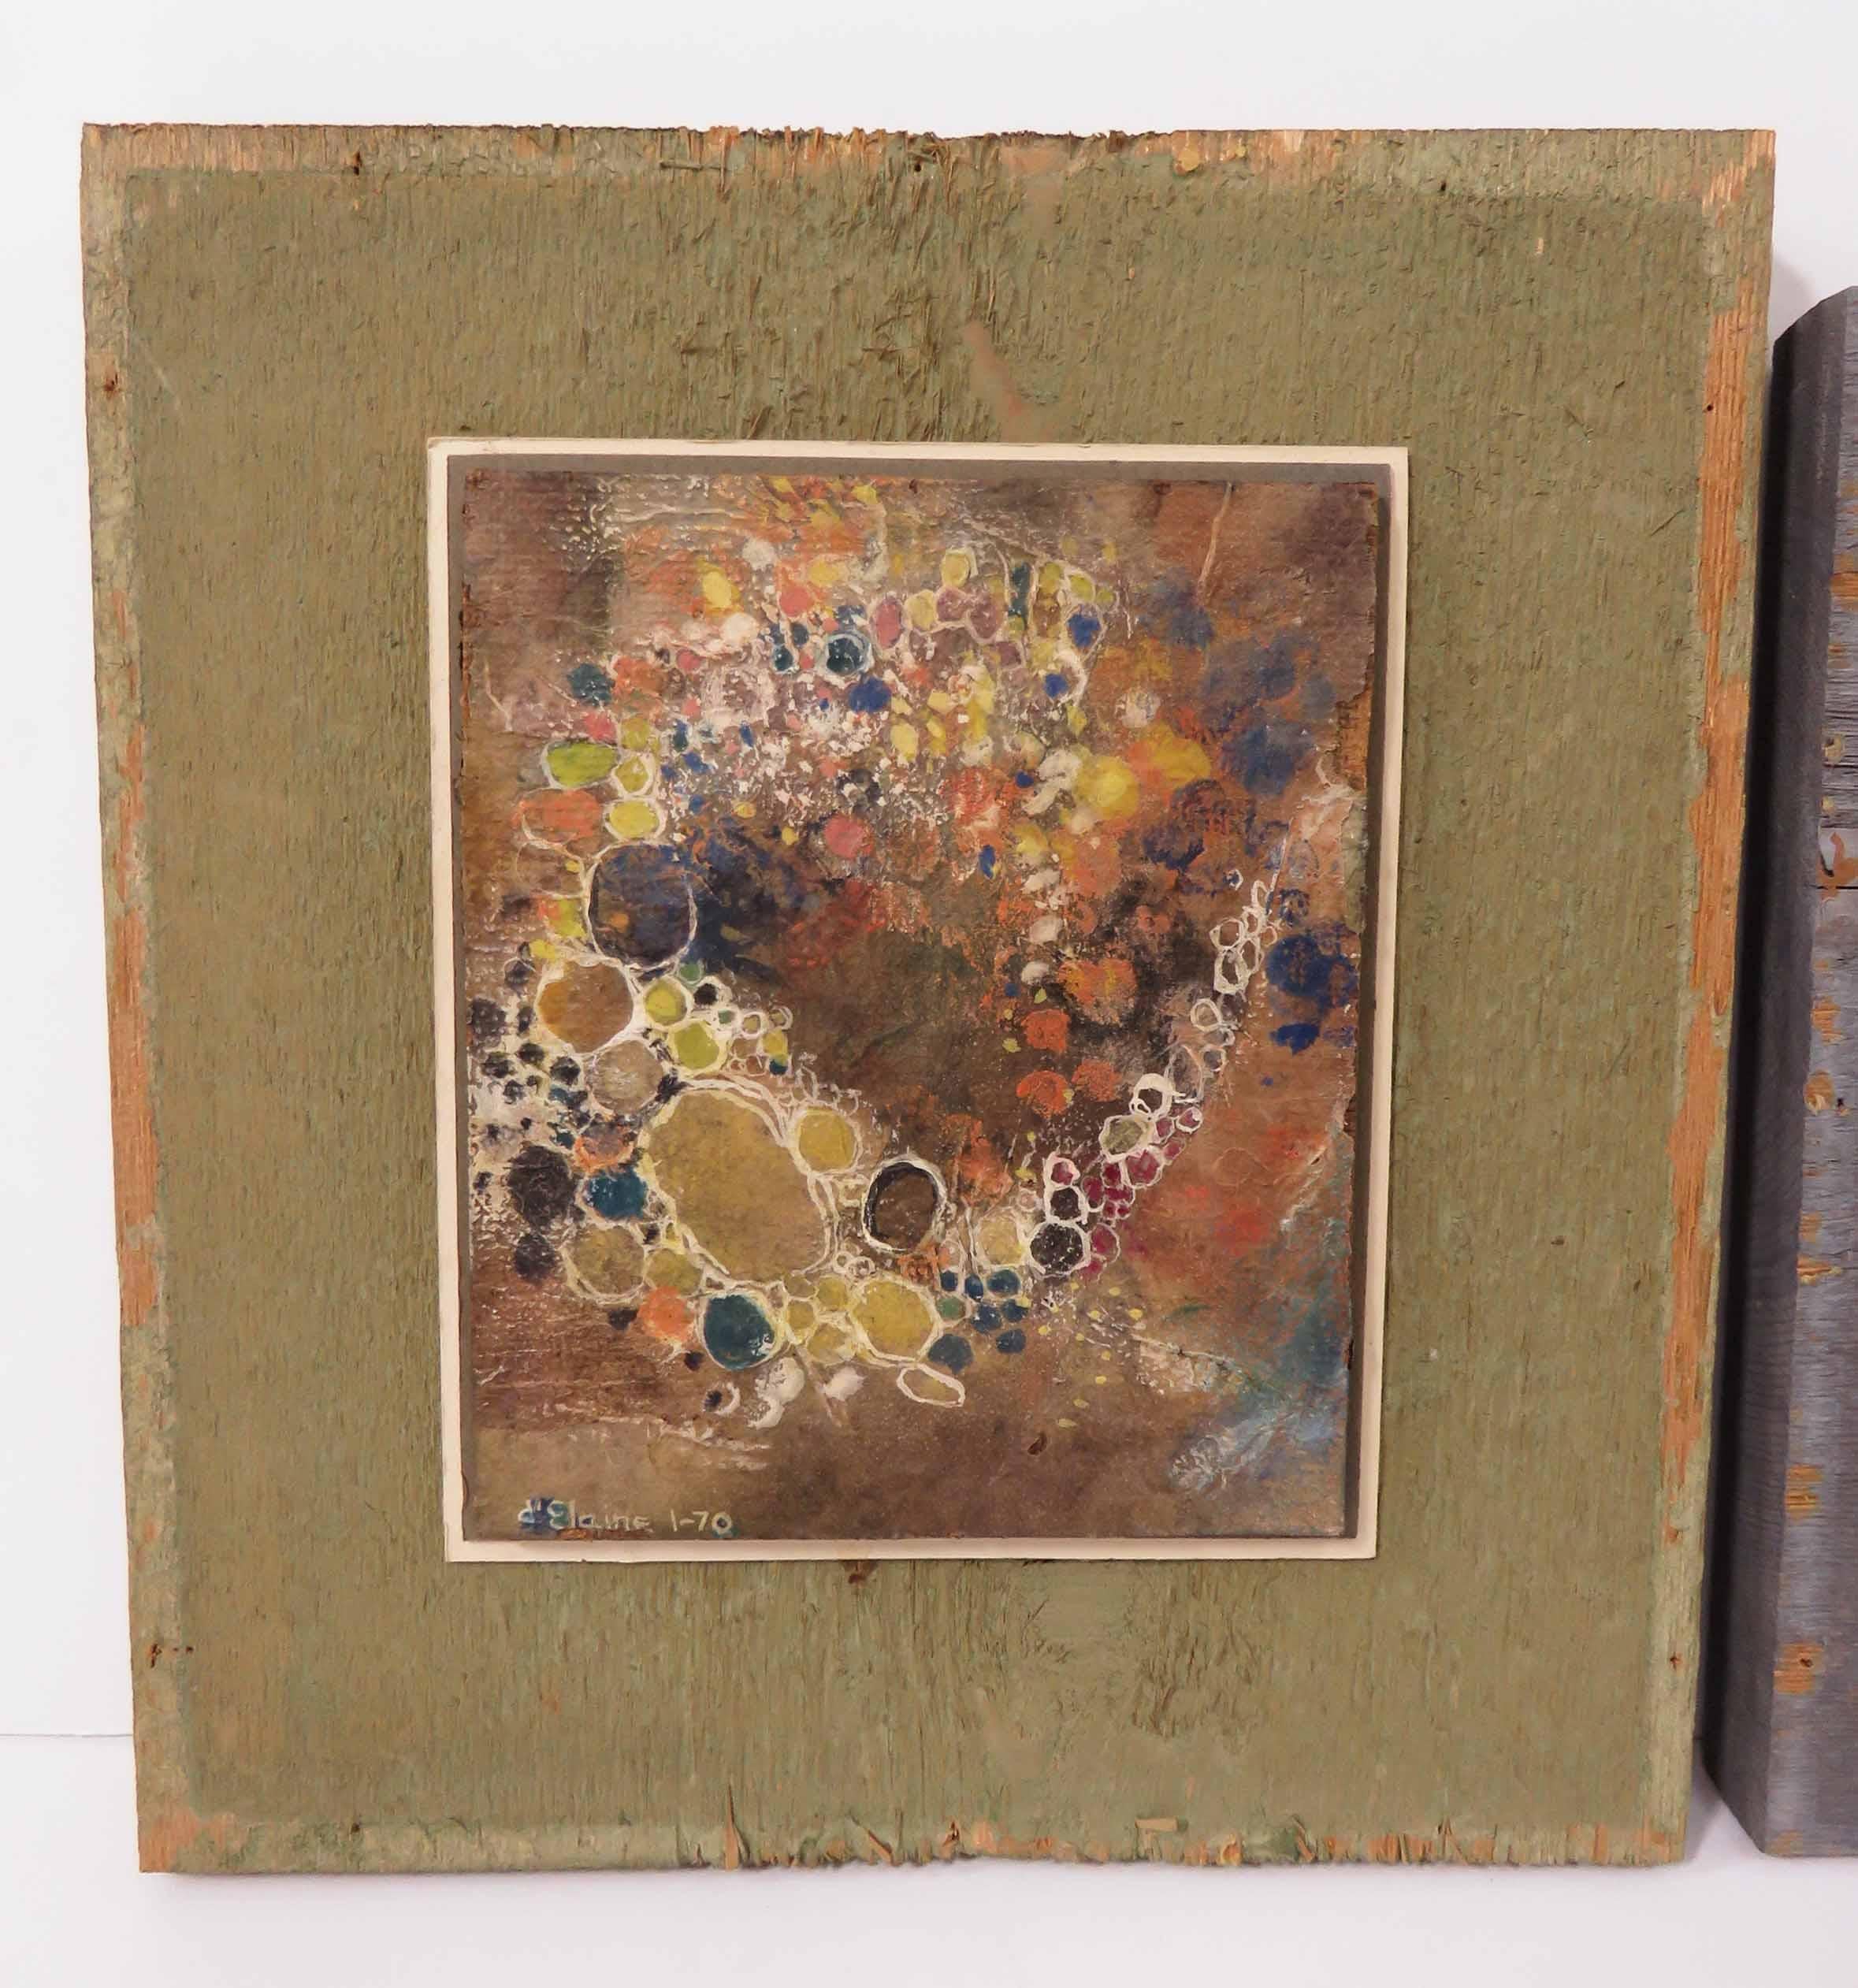 Pair of abstract oil paintings on panel by American Northwest artist d'Elaine Johnson, both early works, dating to 1970. 

Larger painting on the left titled 